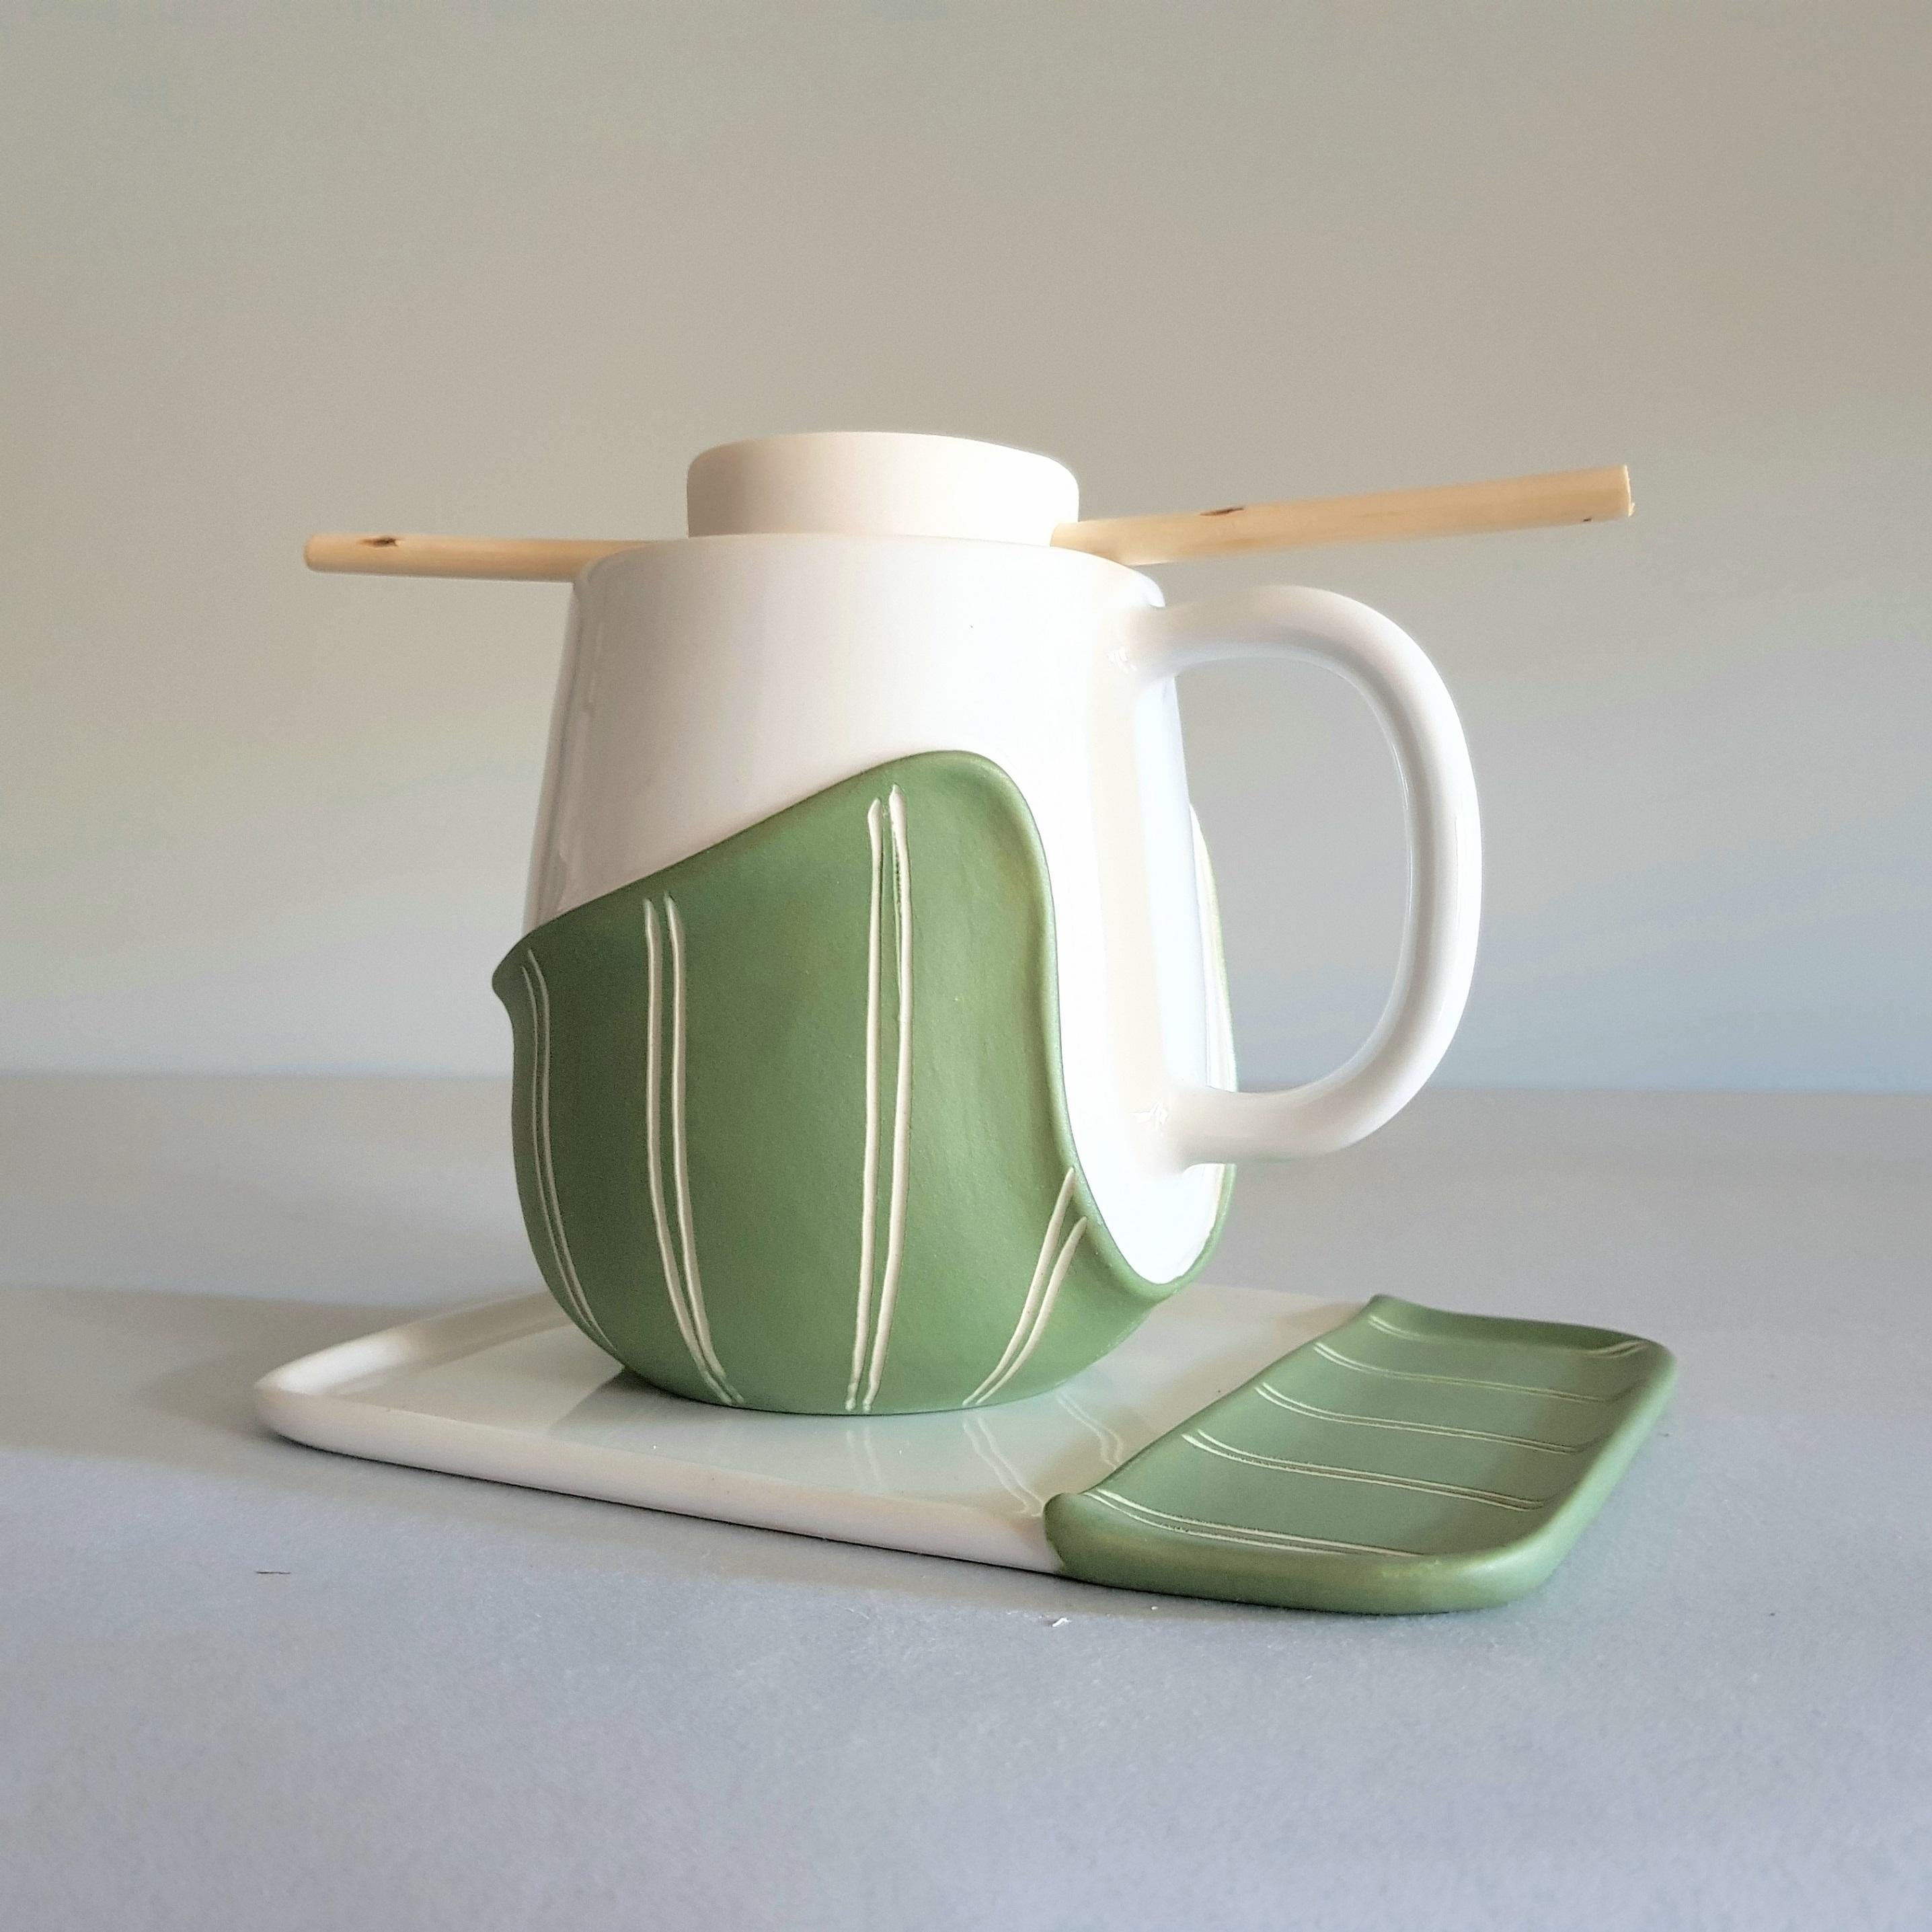 Modern Amélie Tableware and Serveware, Mug and Infuser, Handmade Design in Italy, 2021 For Sale